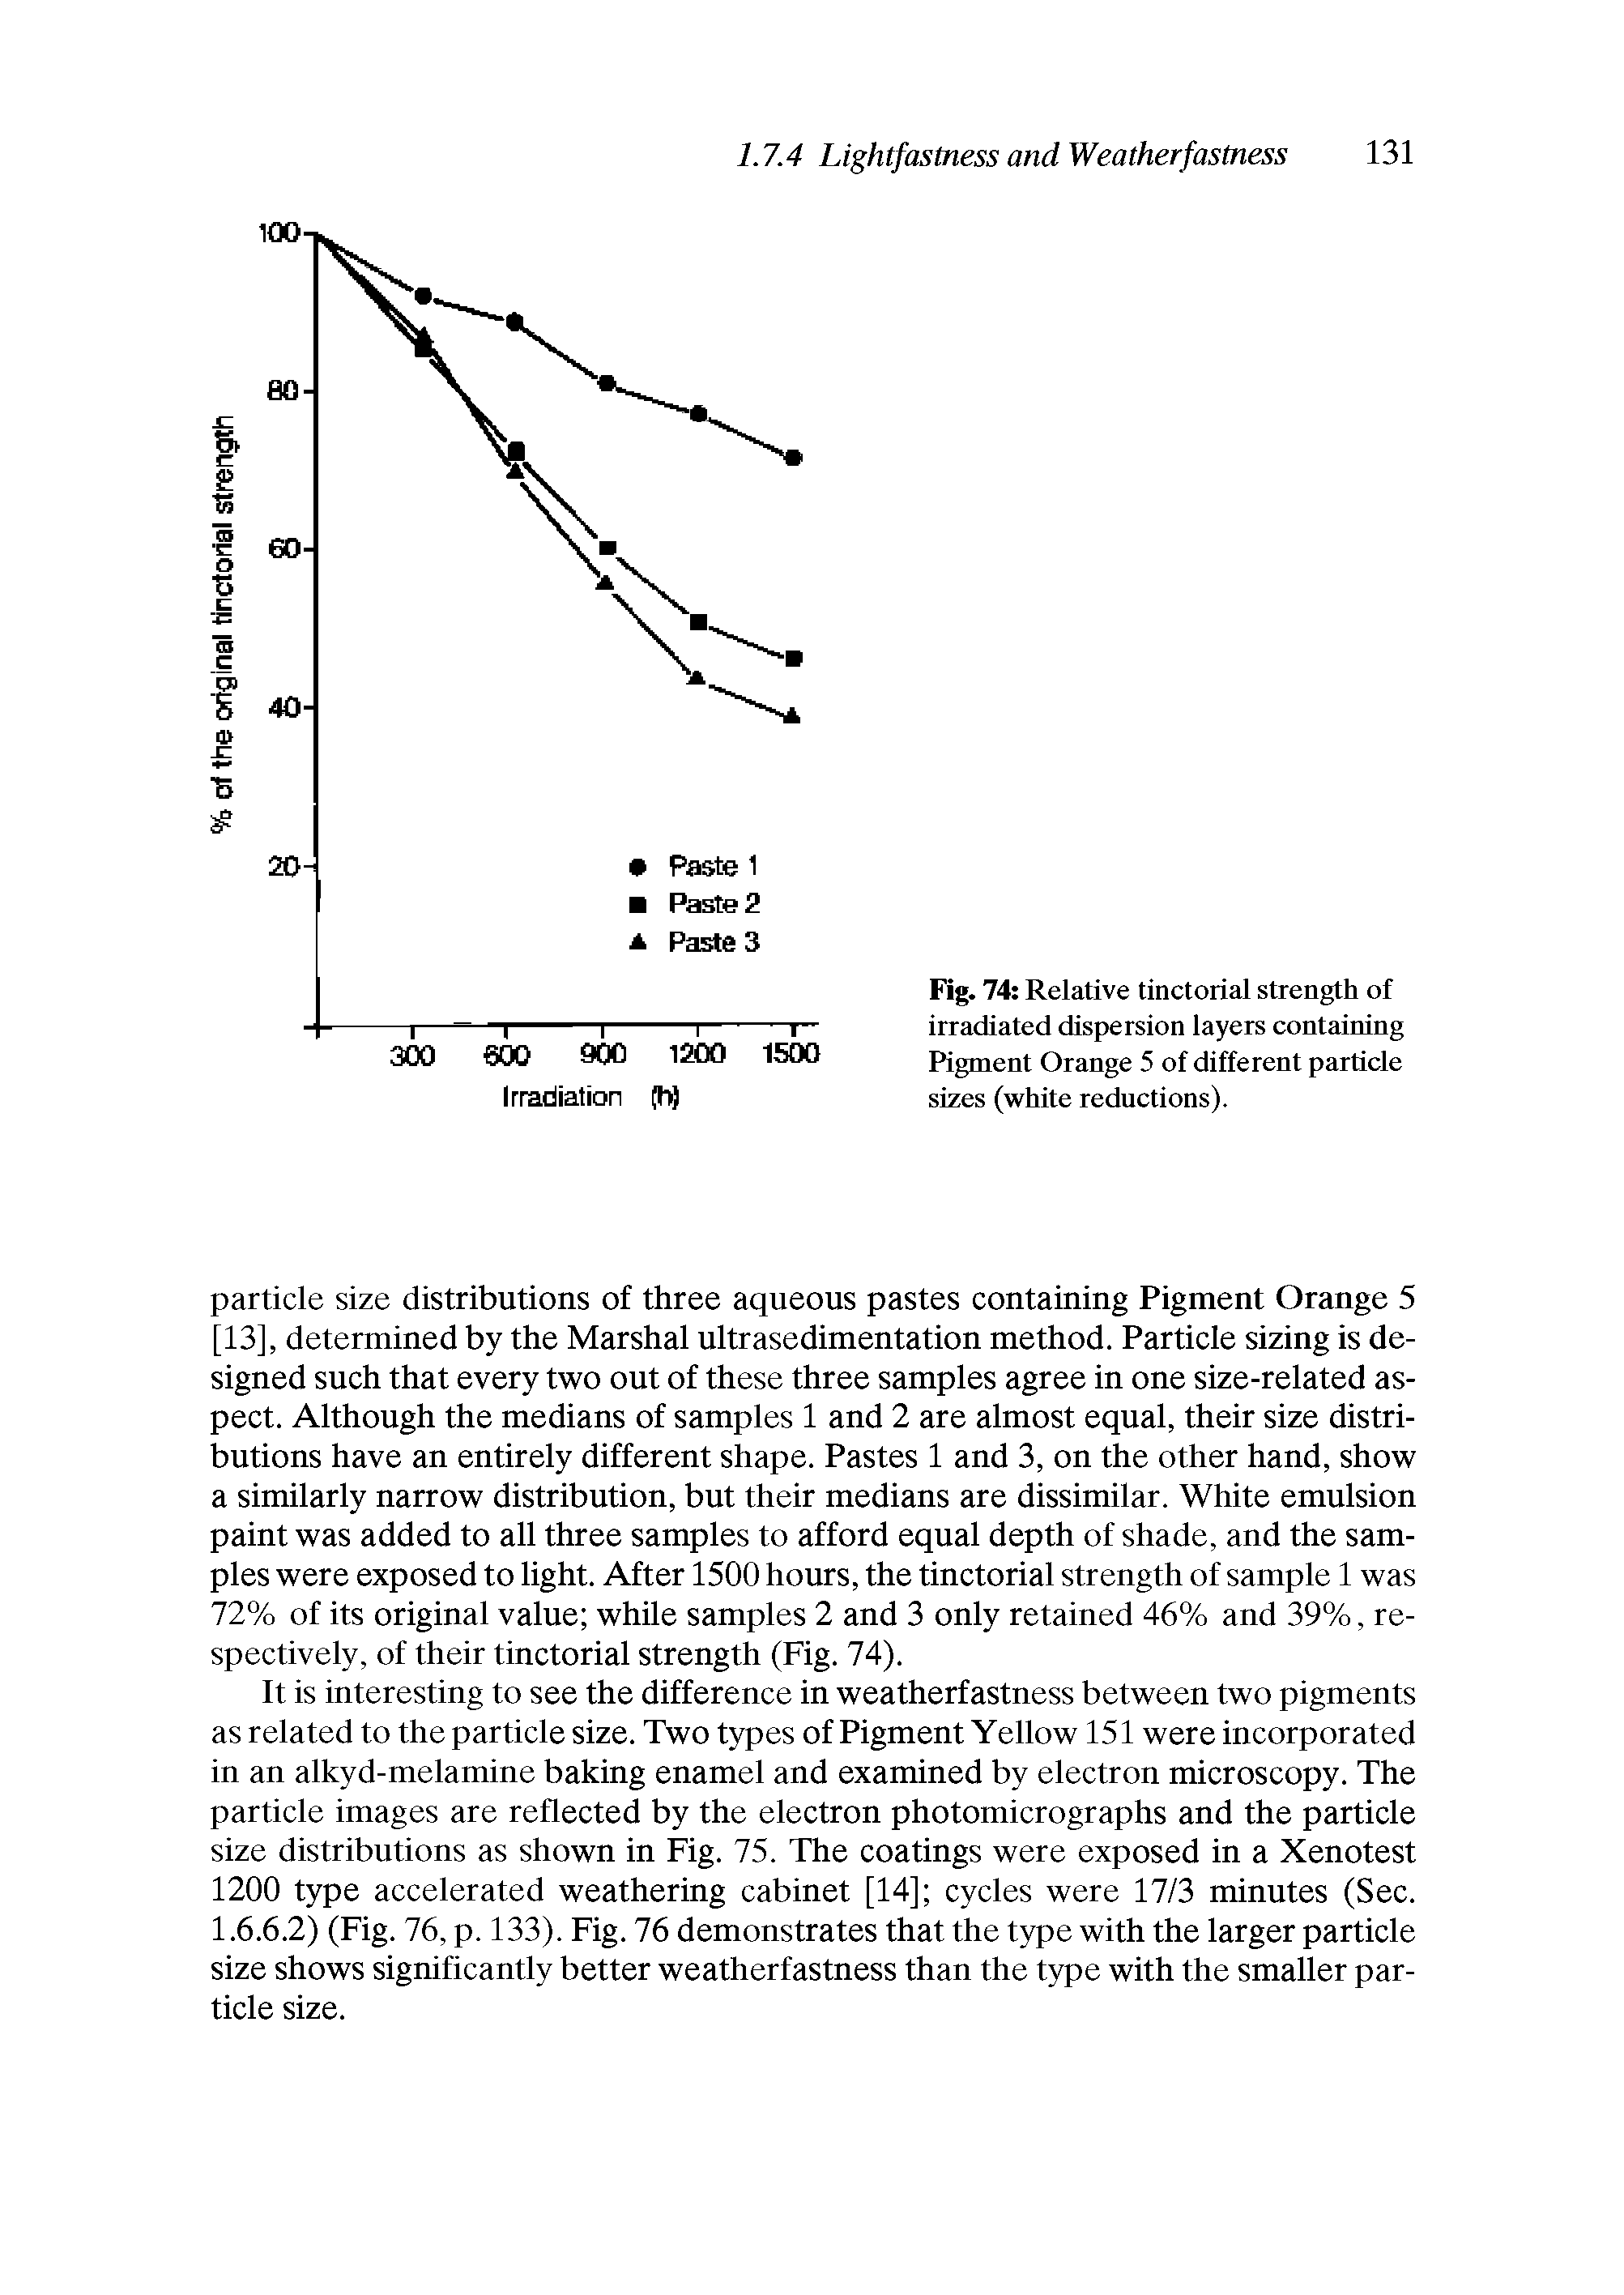 Fig. 74 Relative tinctorial strength of irradiated dispersion layers containing Pigment Orange 5 of different particle sizes (white reductions).